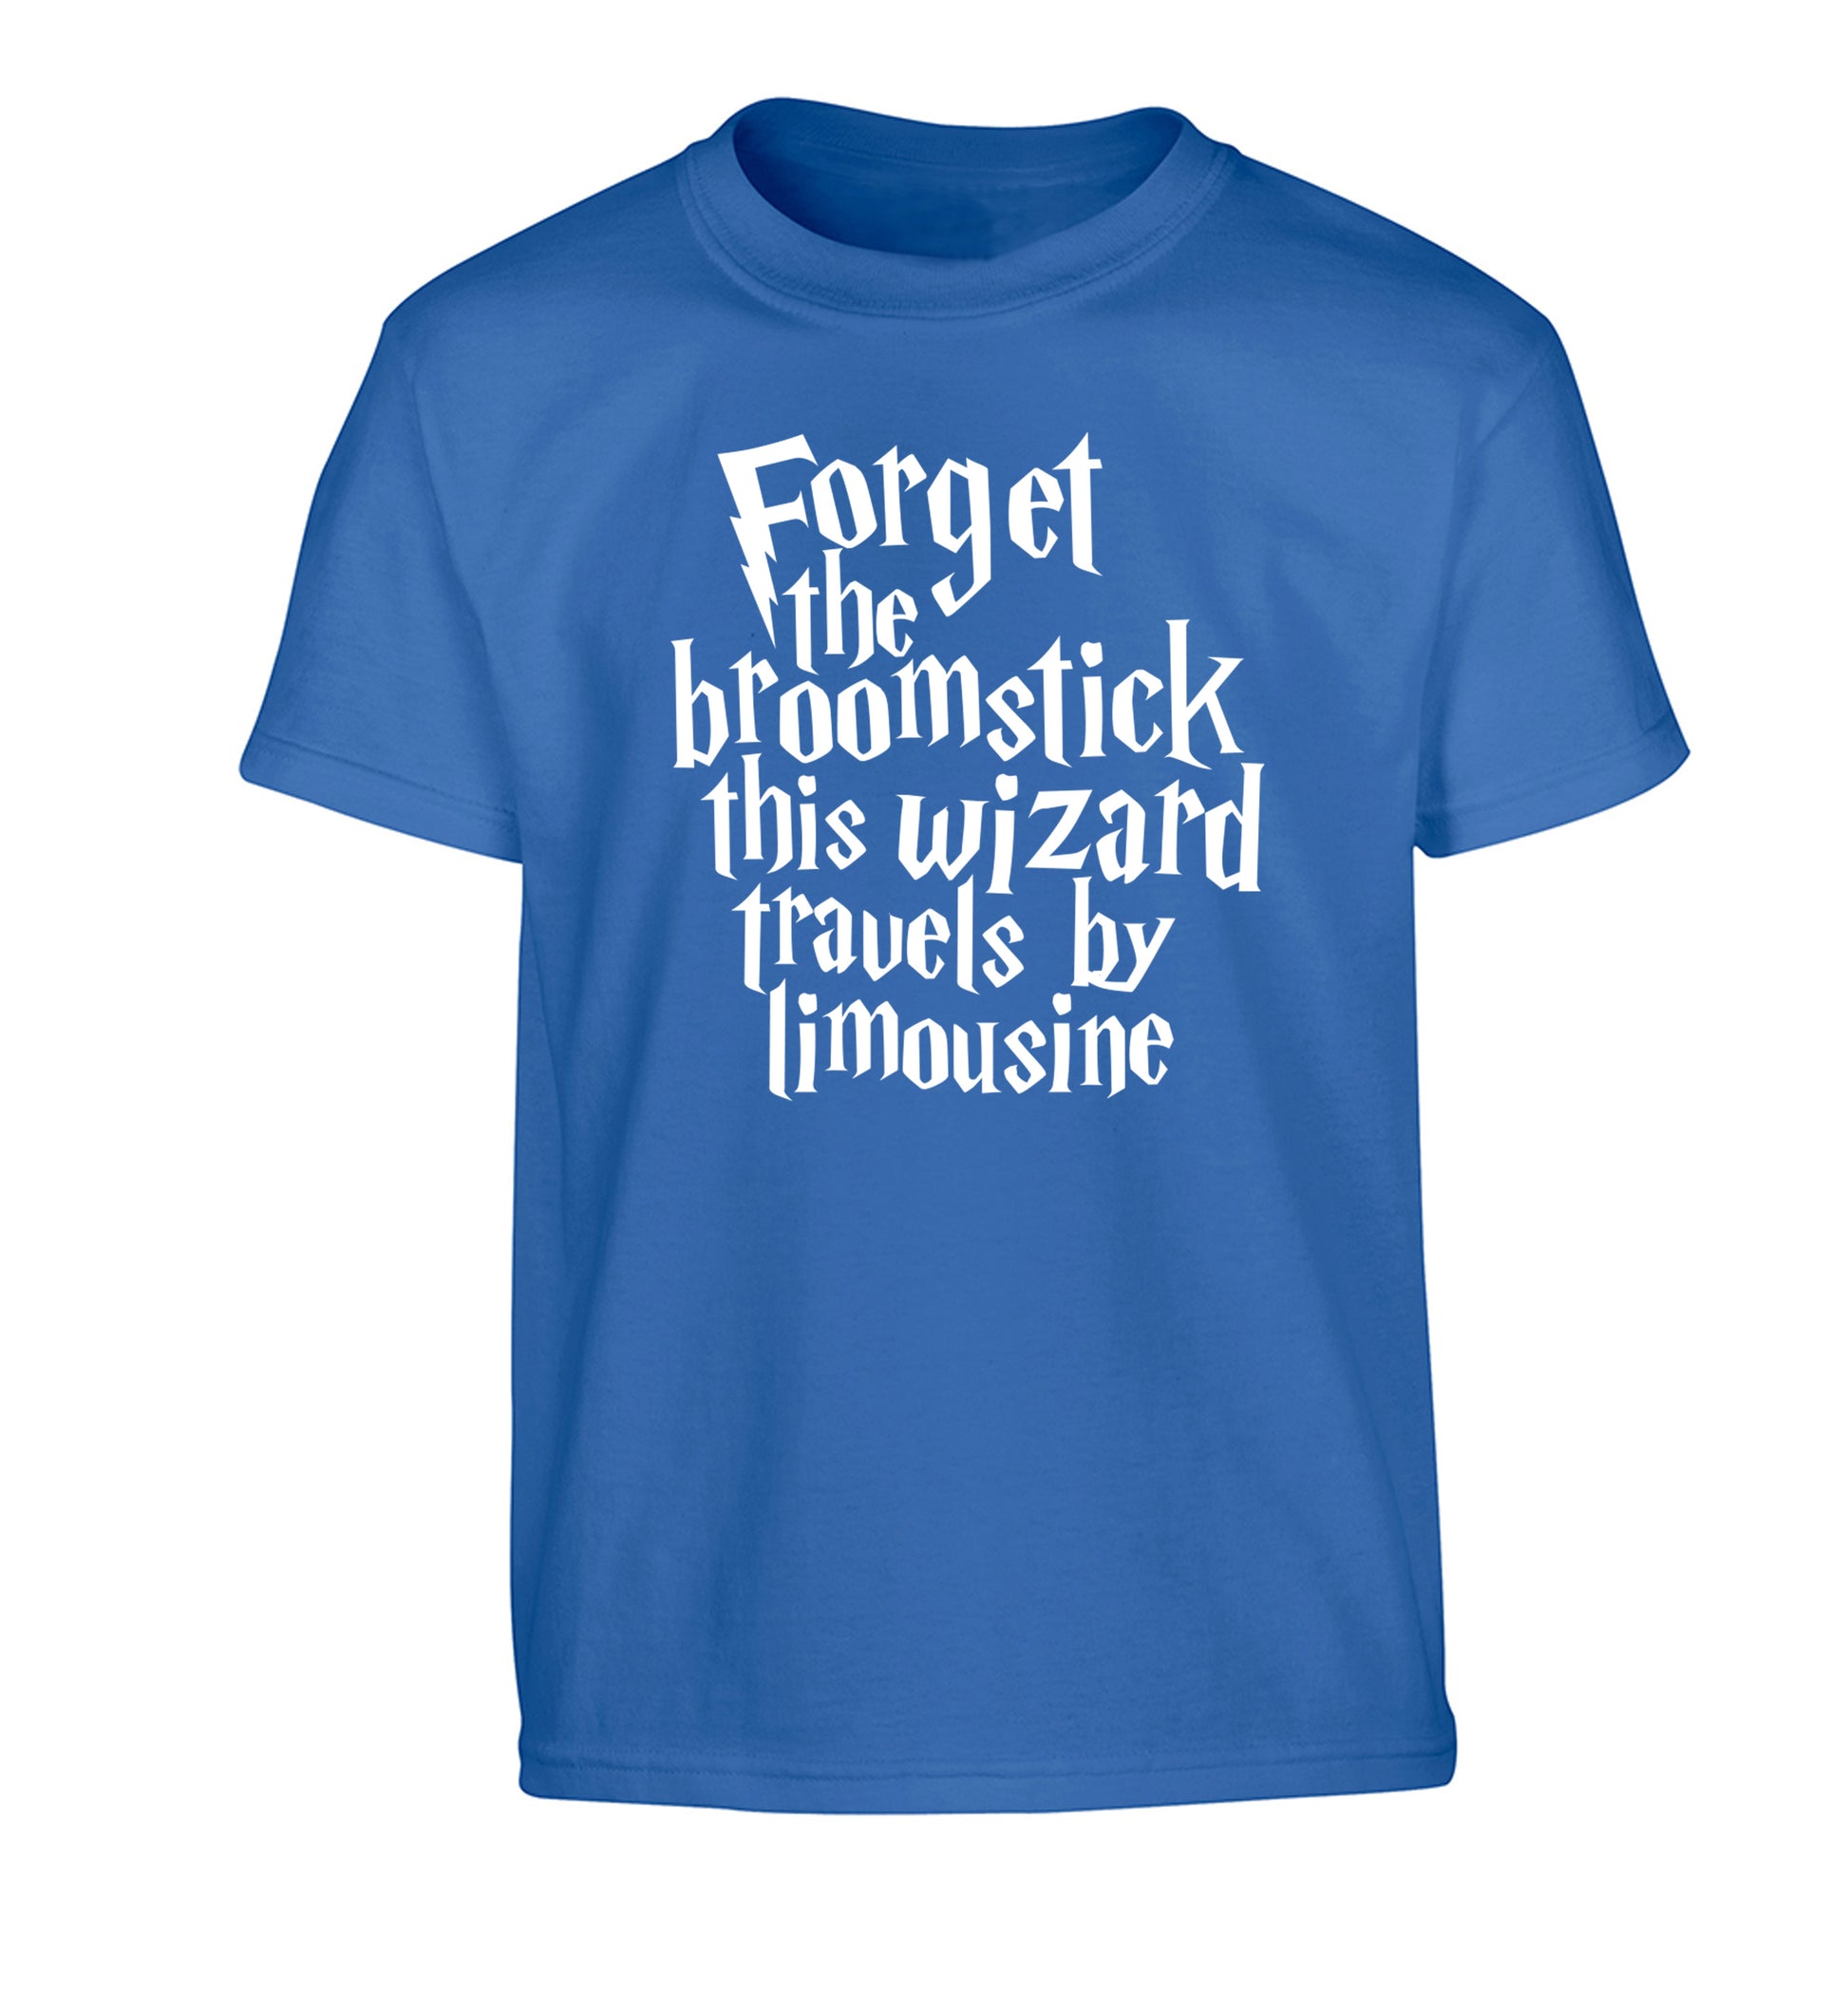 Forget the broomstick this wizard travels by limousine Children's blue Tshirt 12-14 Years